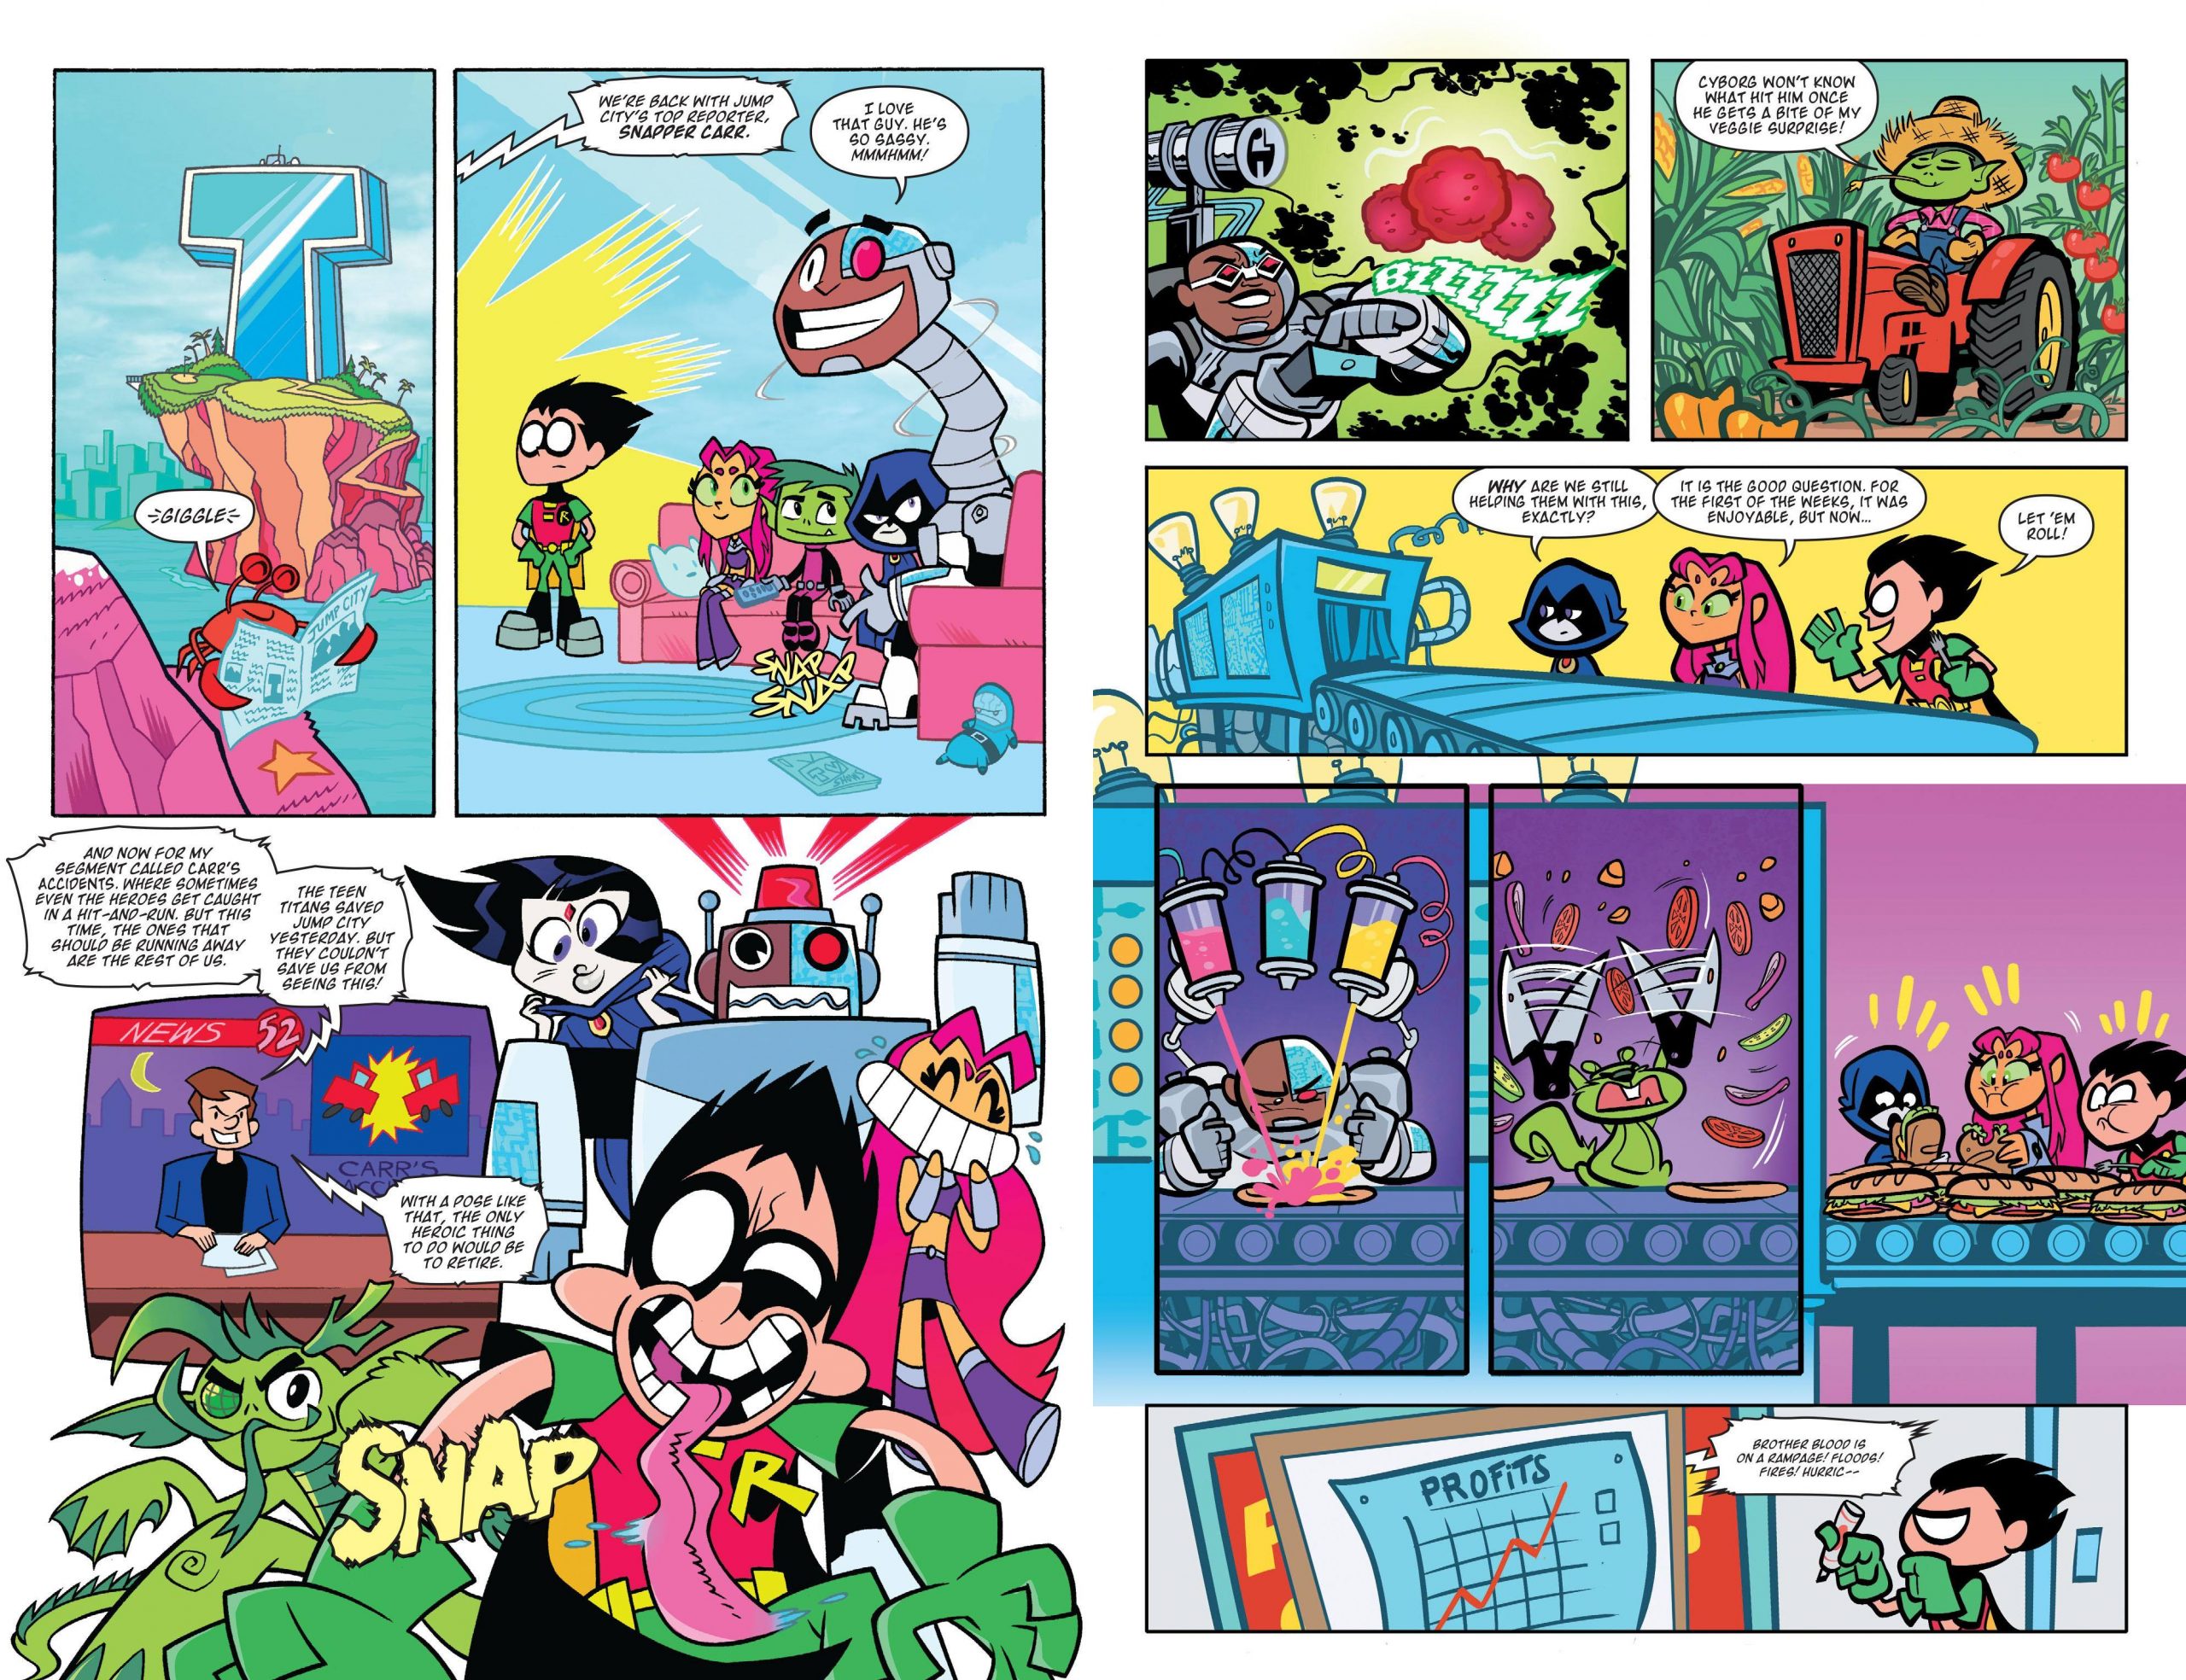 Teen Titans Go! V6 Weirder Things review